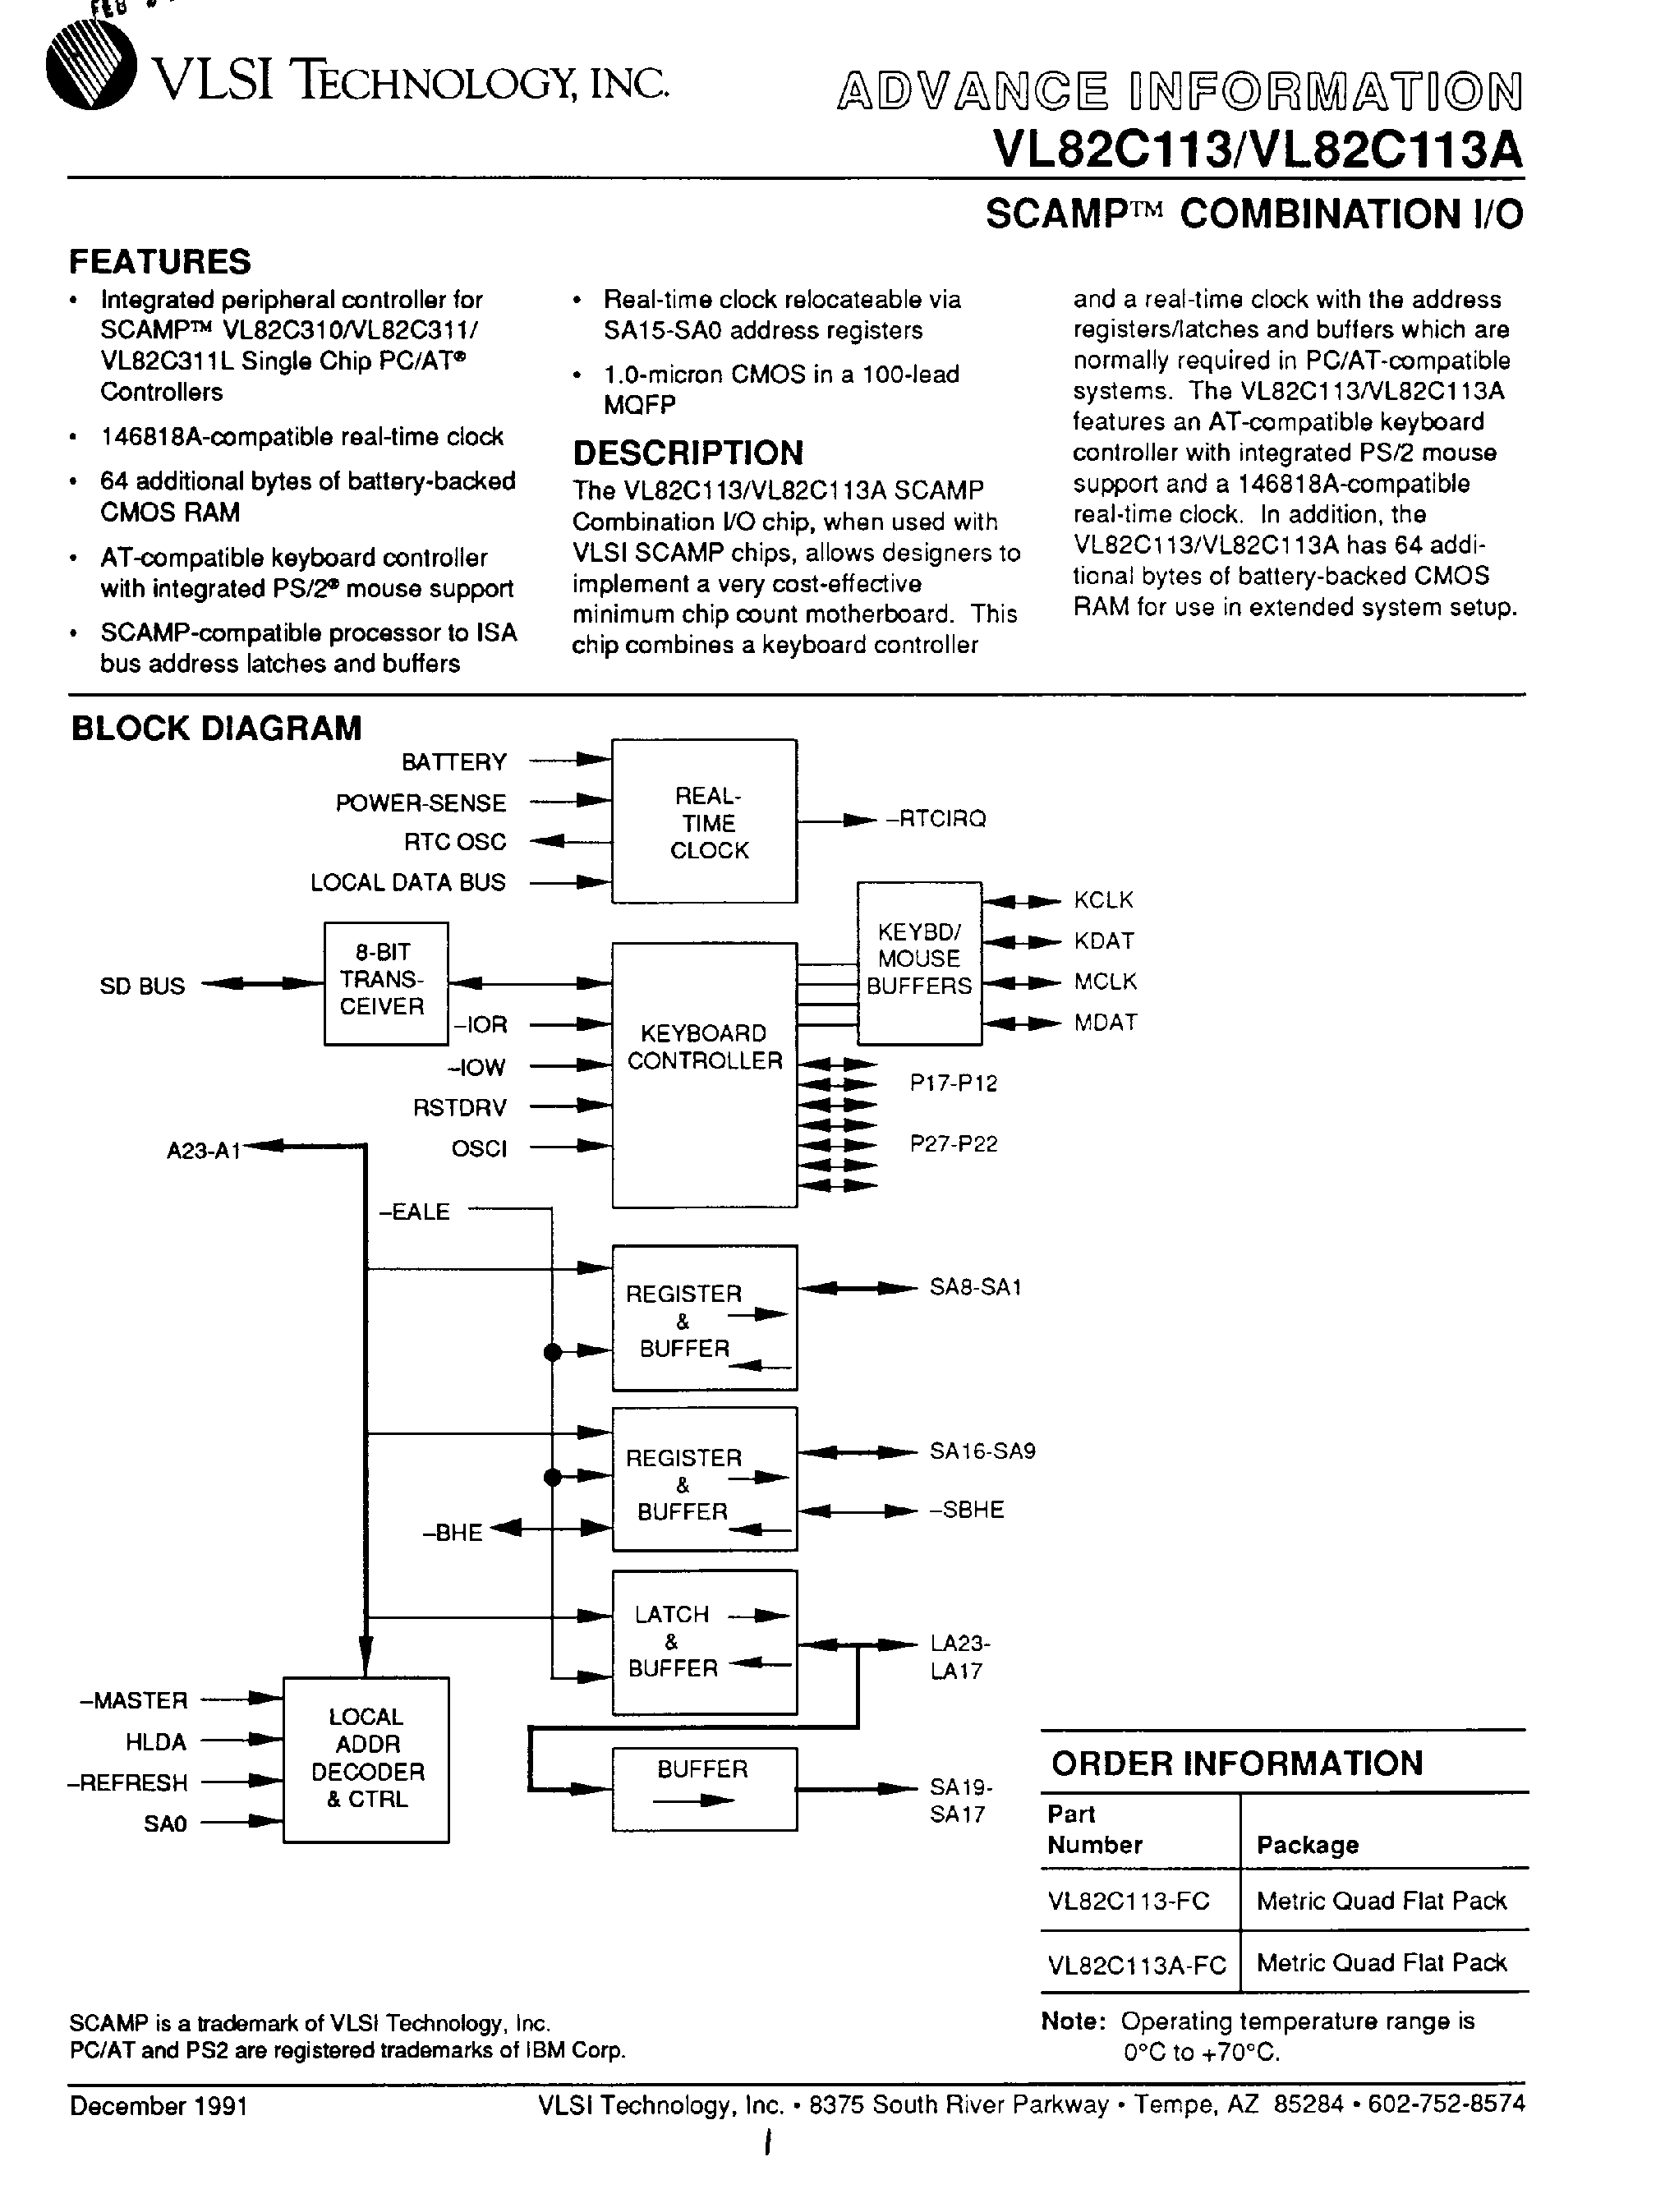 Datasheet VL82C113A - SCAMP Combination I/O page 1